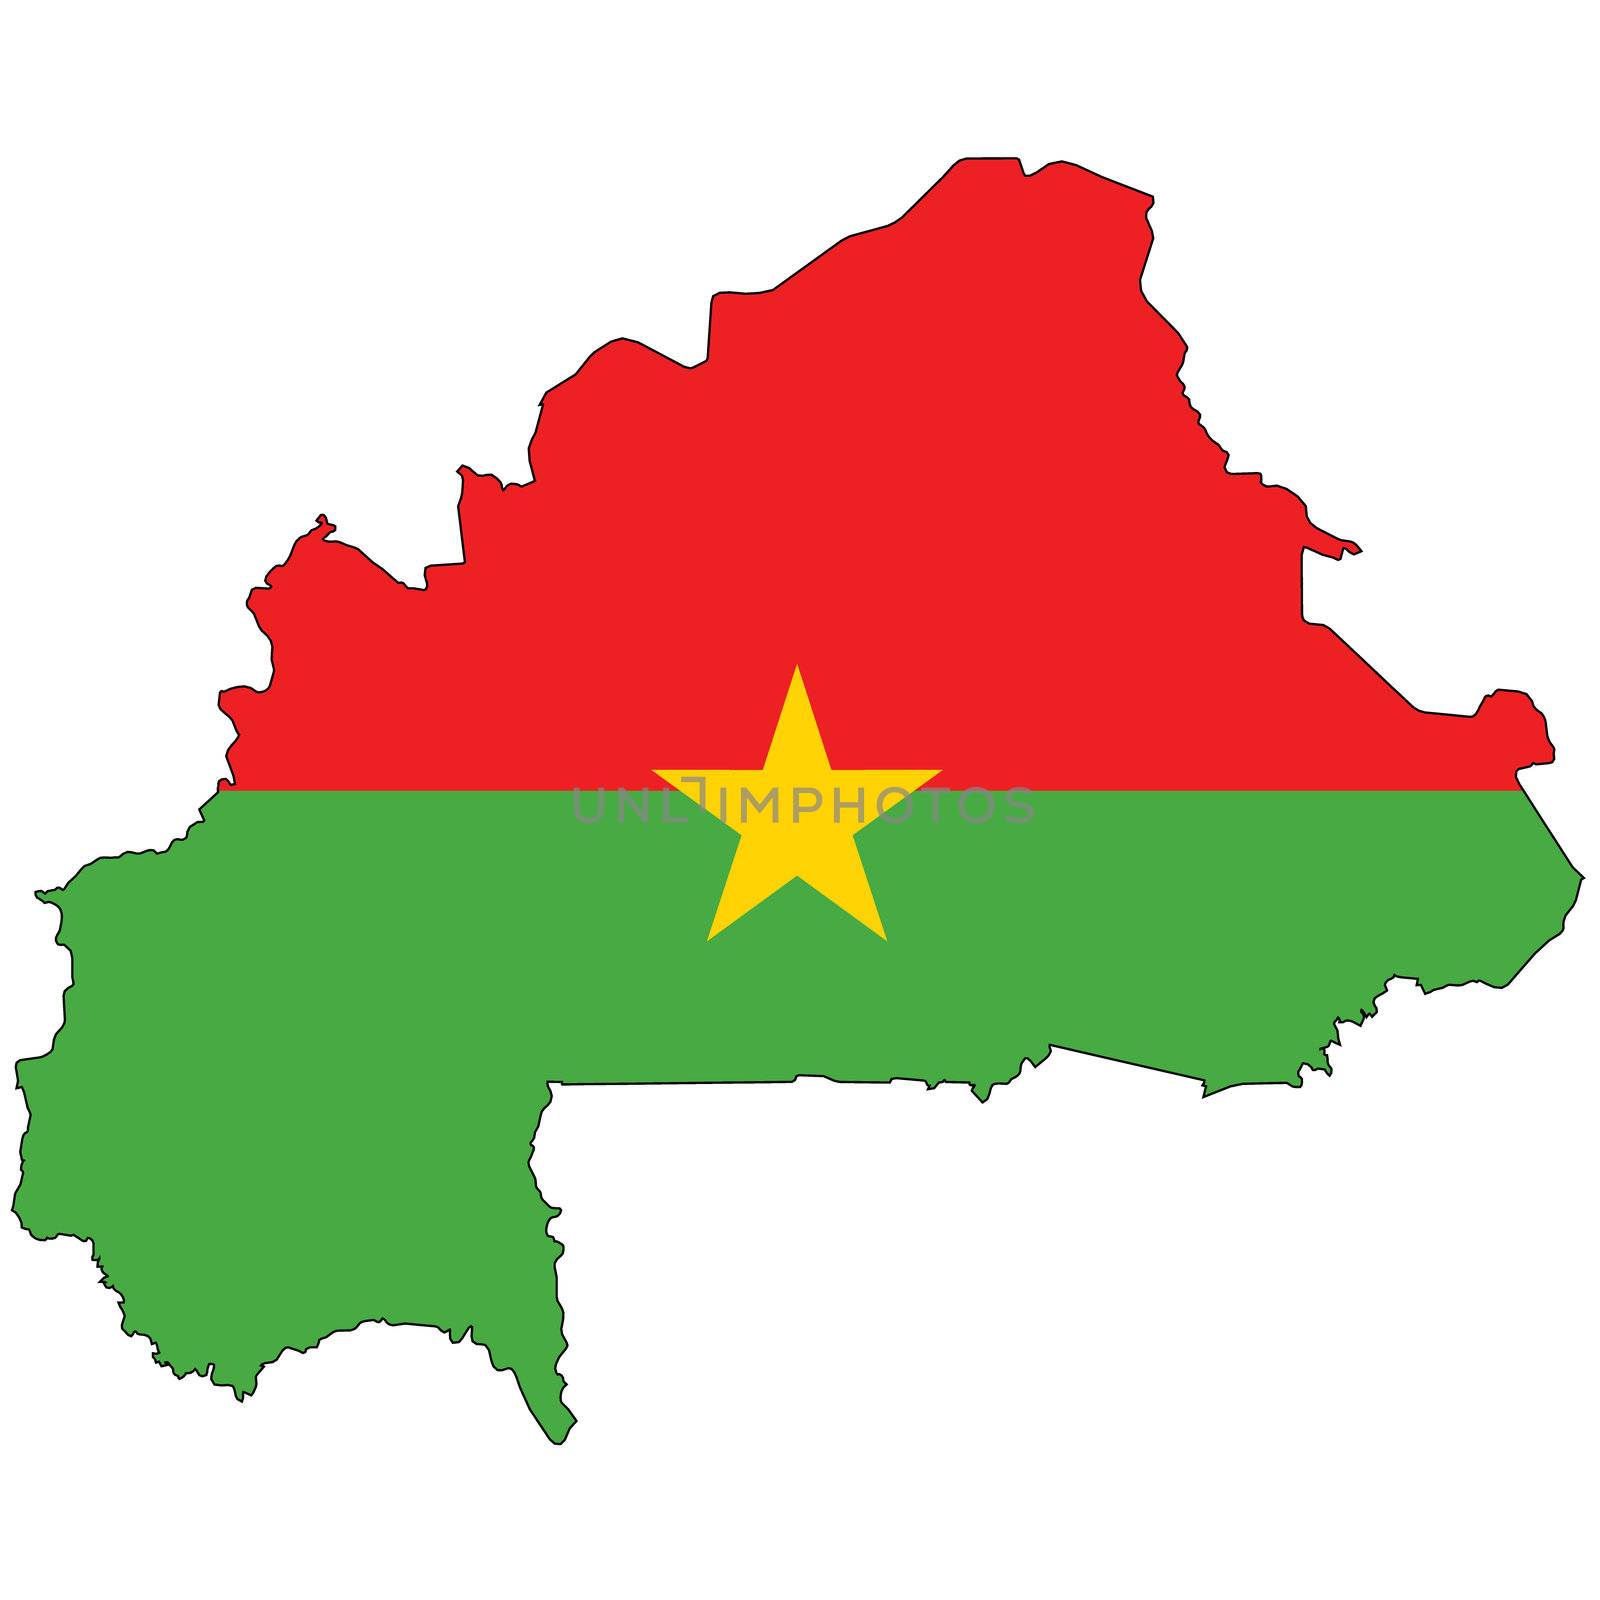 Country outline with the flag of Burkina Faso by DragonEyeMedia